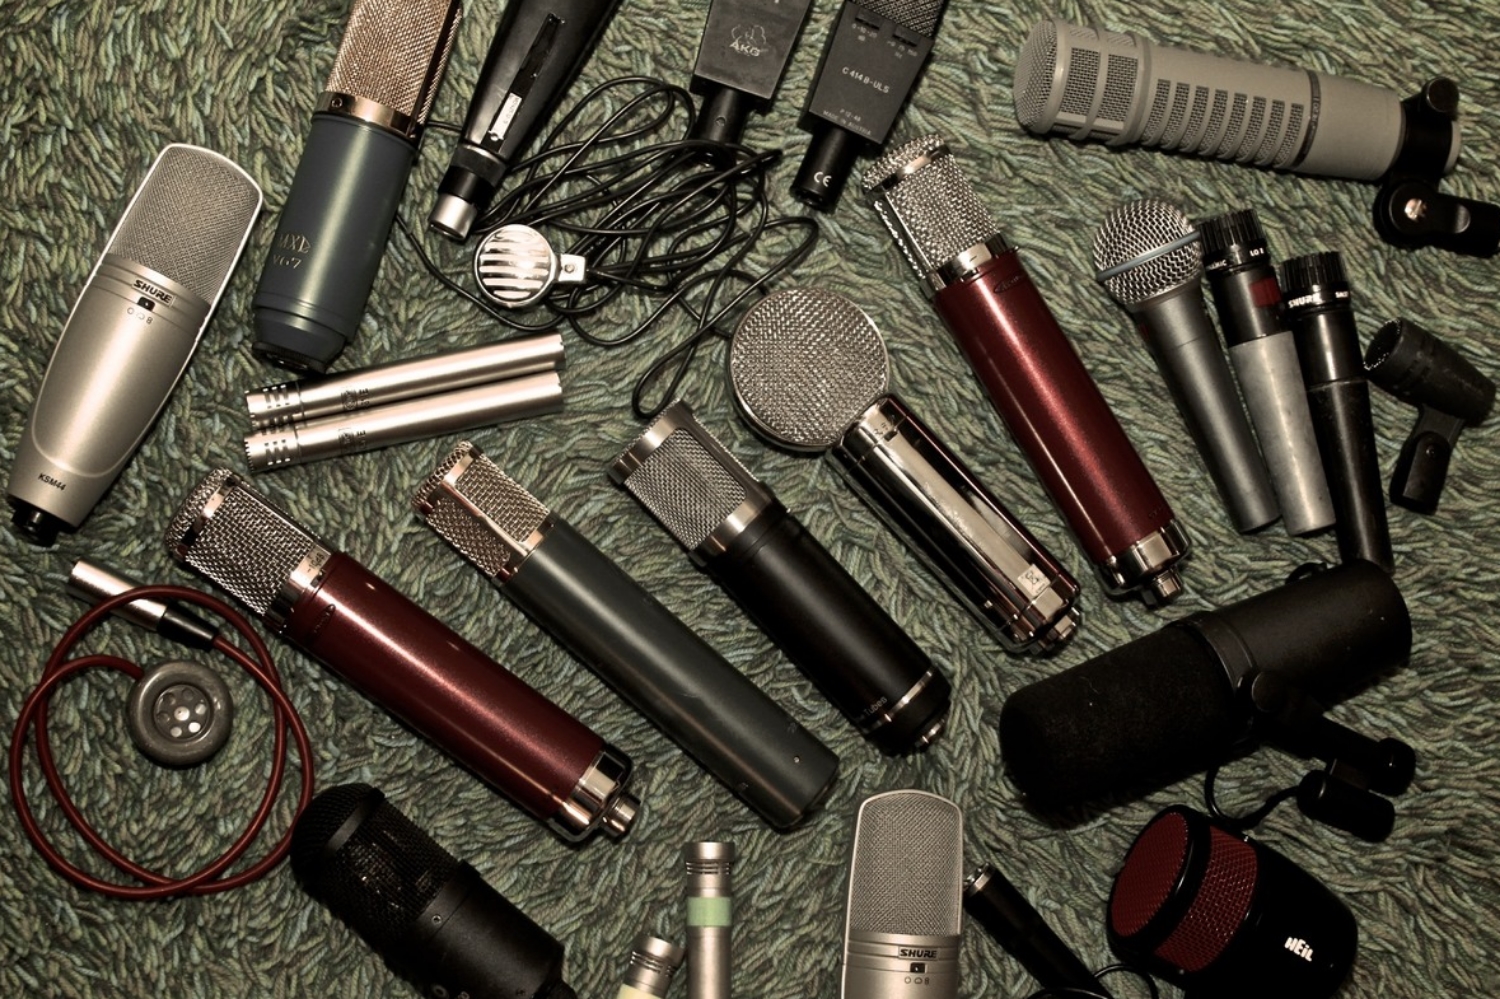 ready to select the right mic for the application